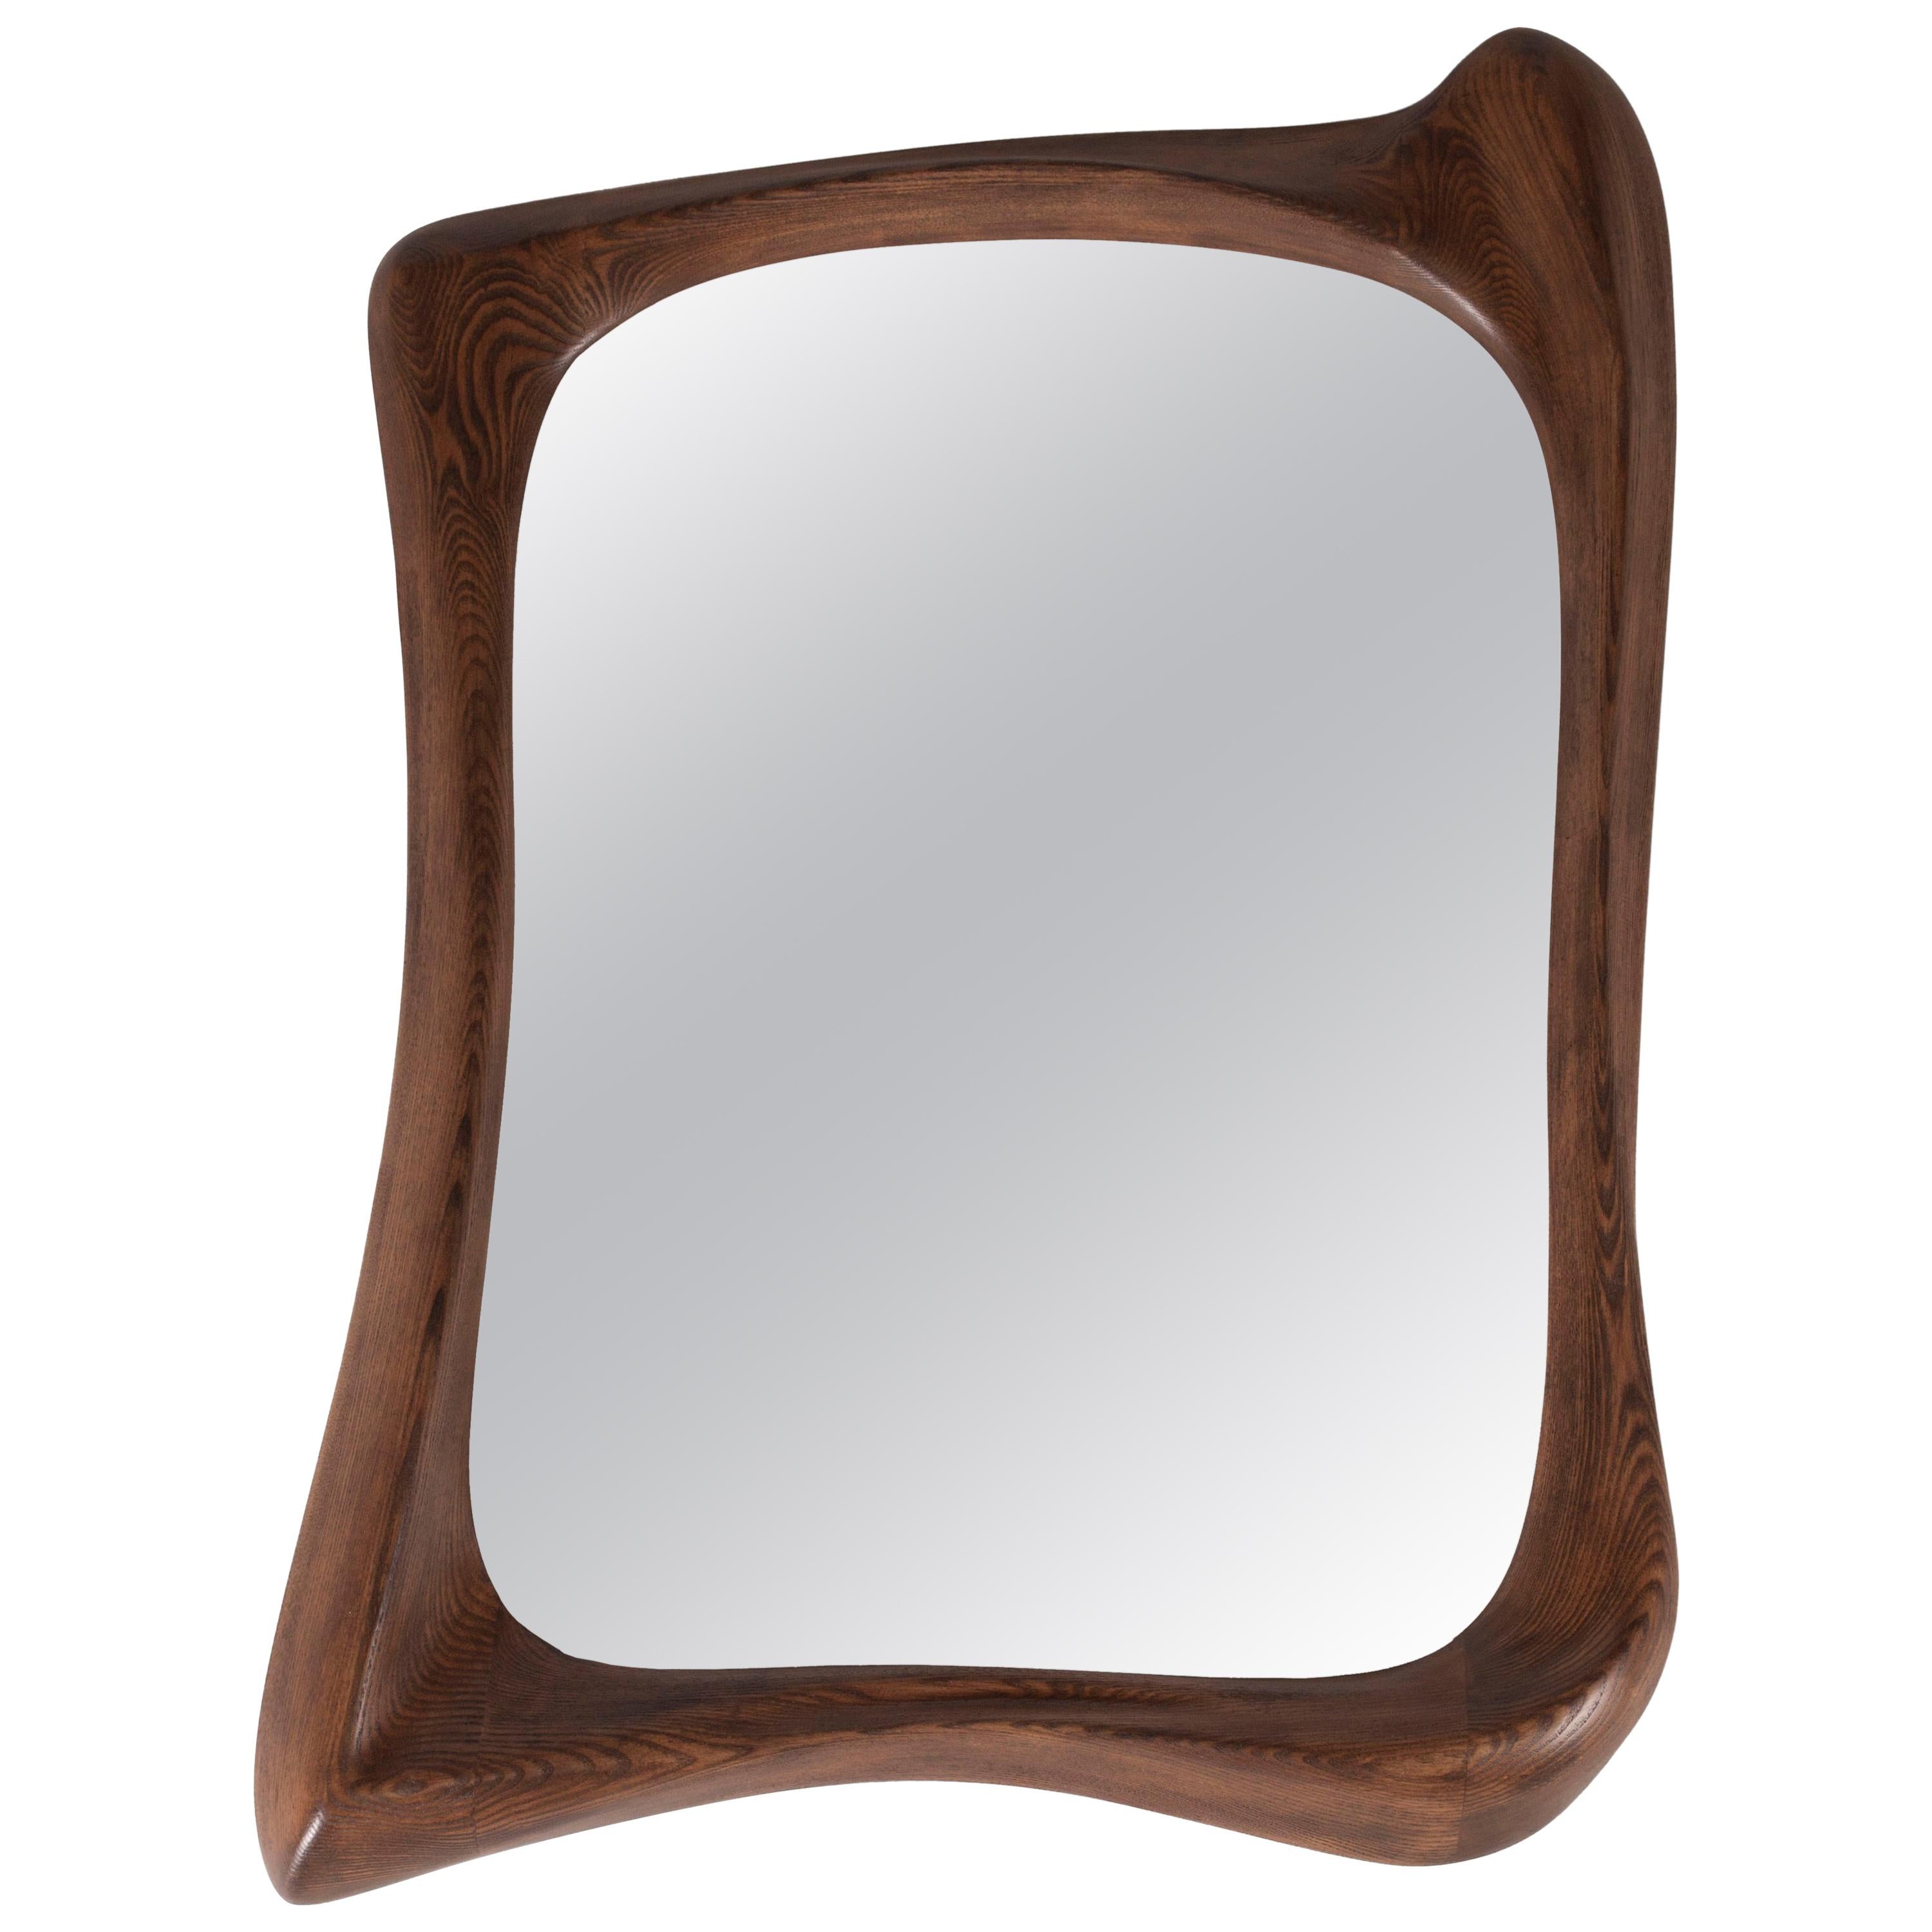 Amorph Narcissus Mirror in Graphite Walnut stain on Ash wood